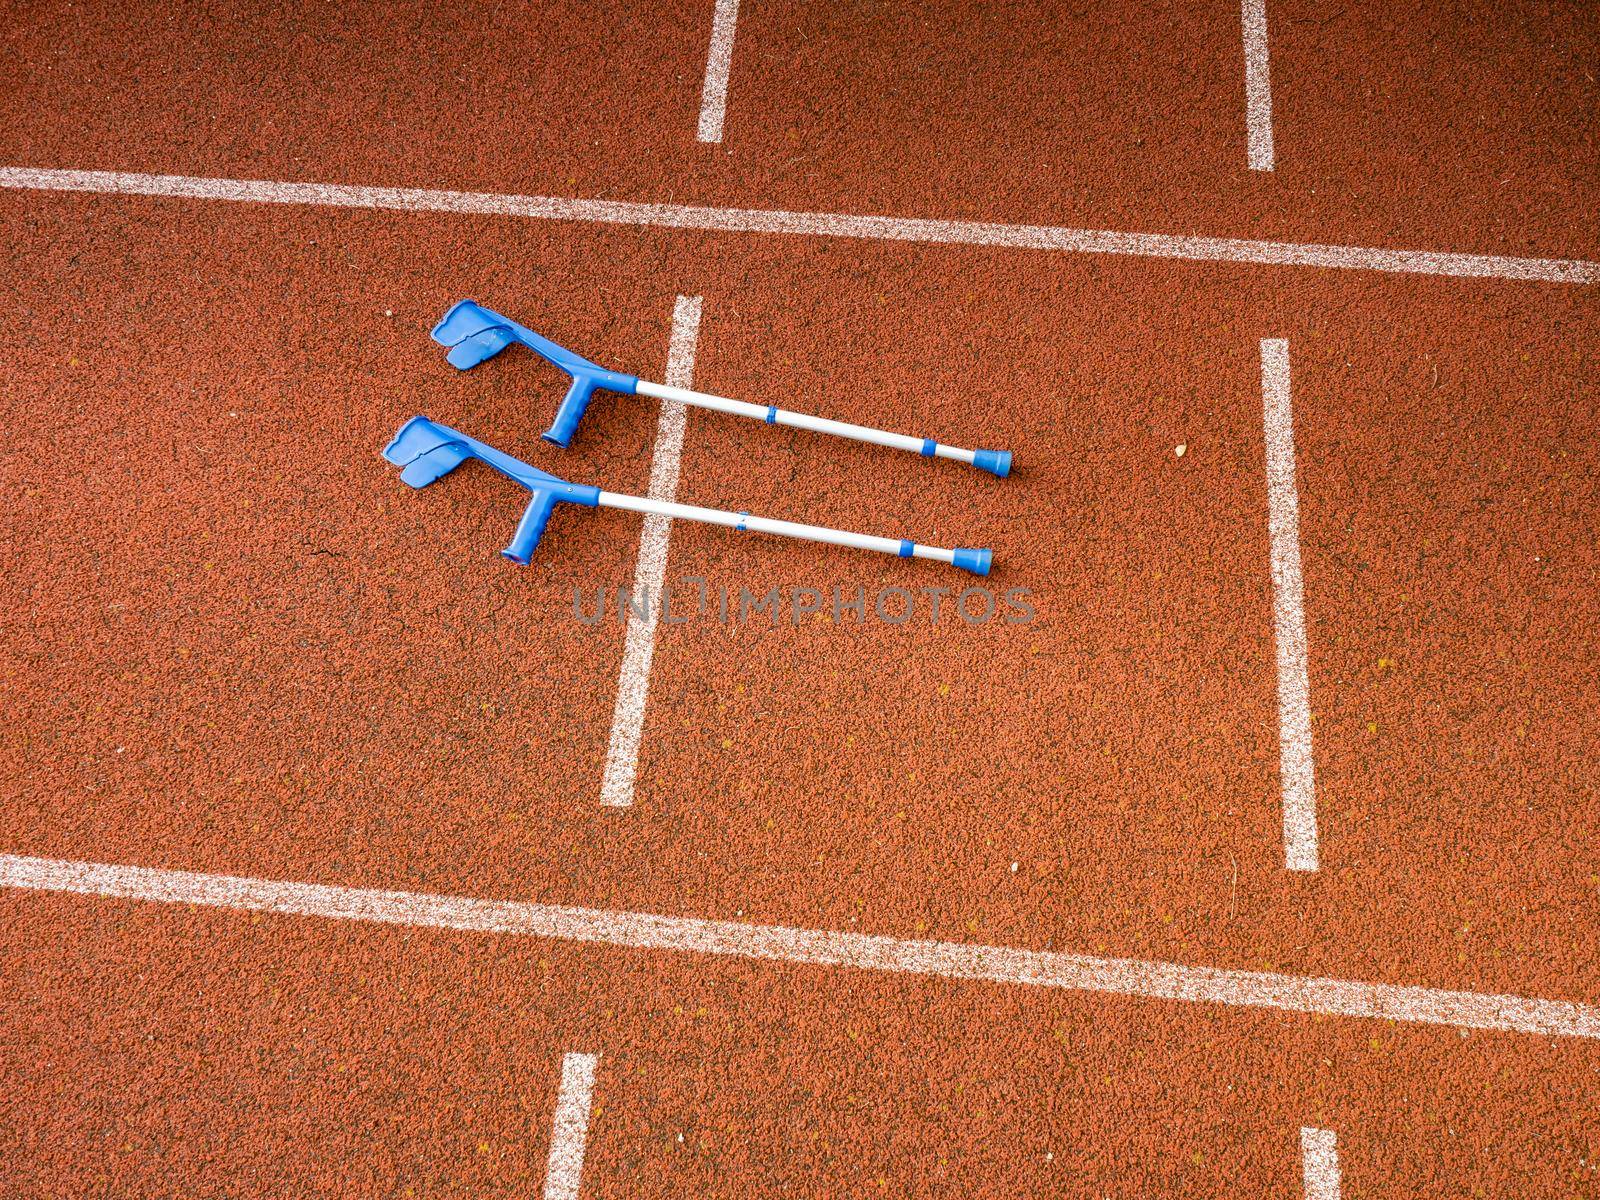 Forearm crutches on red running track on stadium. Run lines by rdonar2